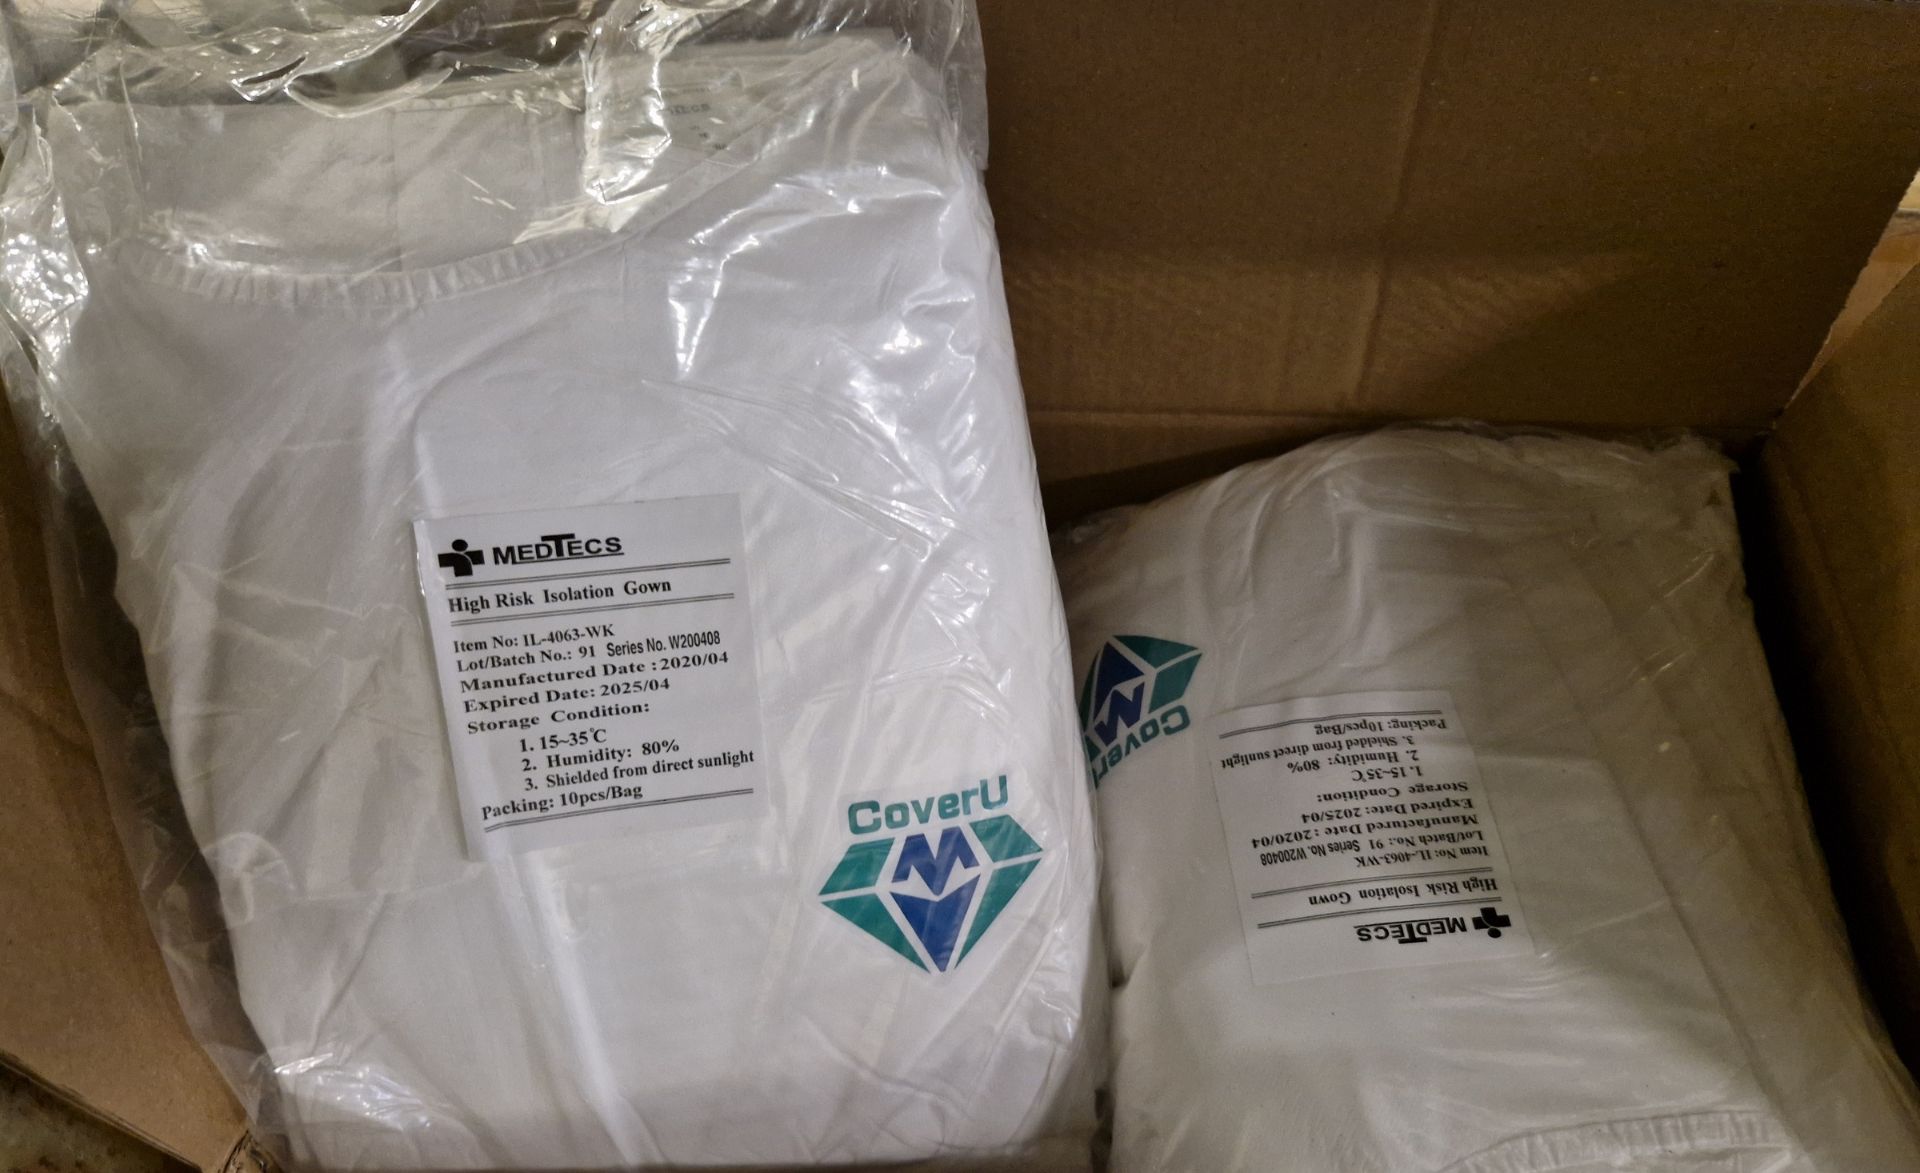 5x boxes of Easigown 28030 Comfort Apron, thumb looped aprons for full body and arm protection - Image 2 of 3